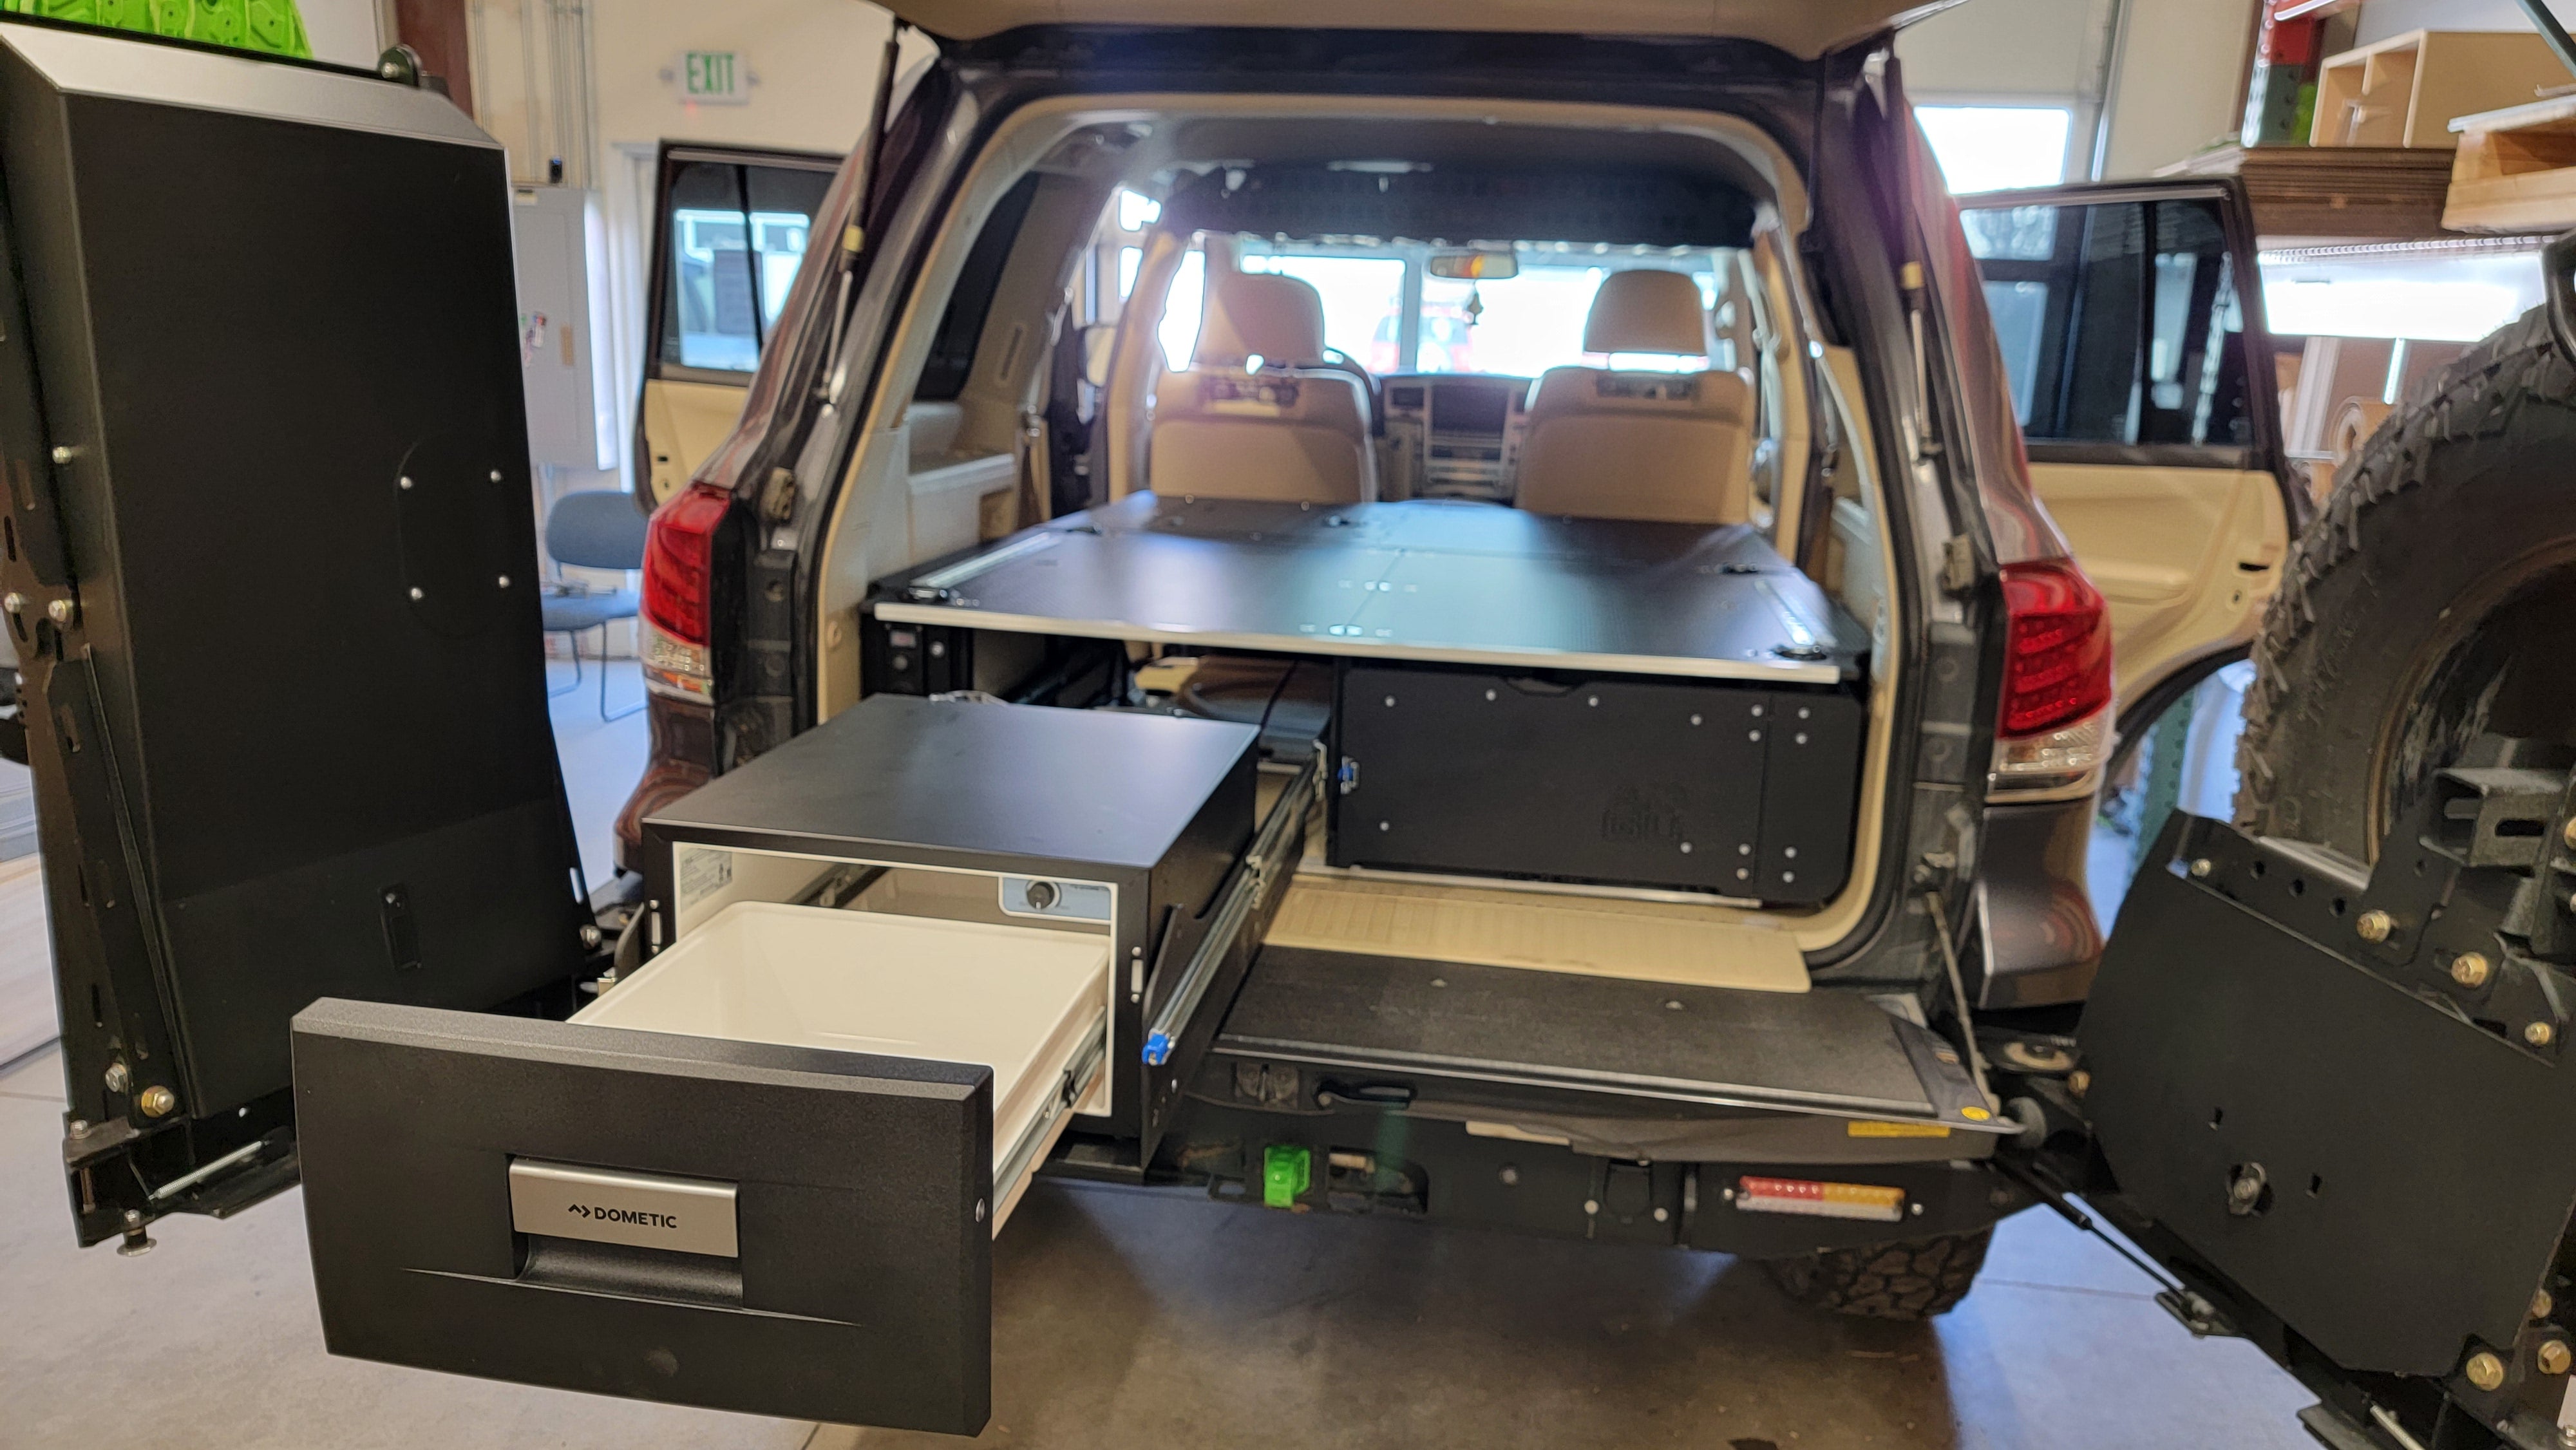 200 Series Toyota Land Cruiser LX570 drawer system with fridge and sleeping platform for vehicle organization perfect for overland travel.